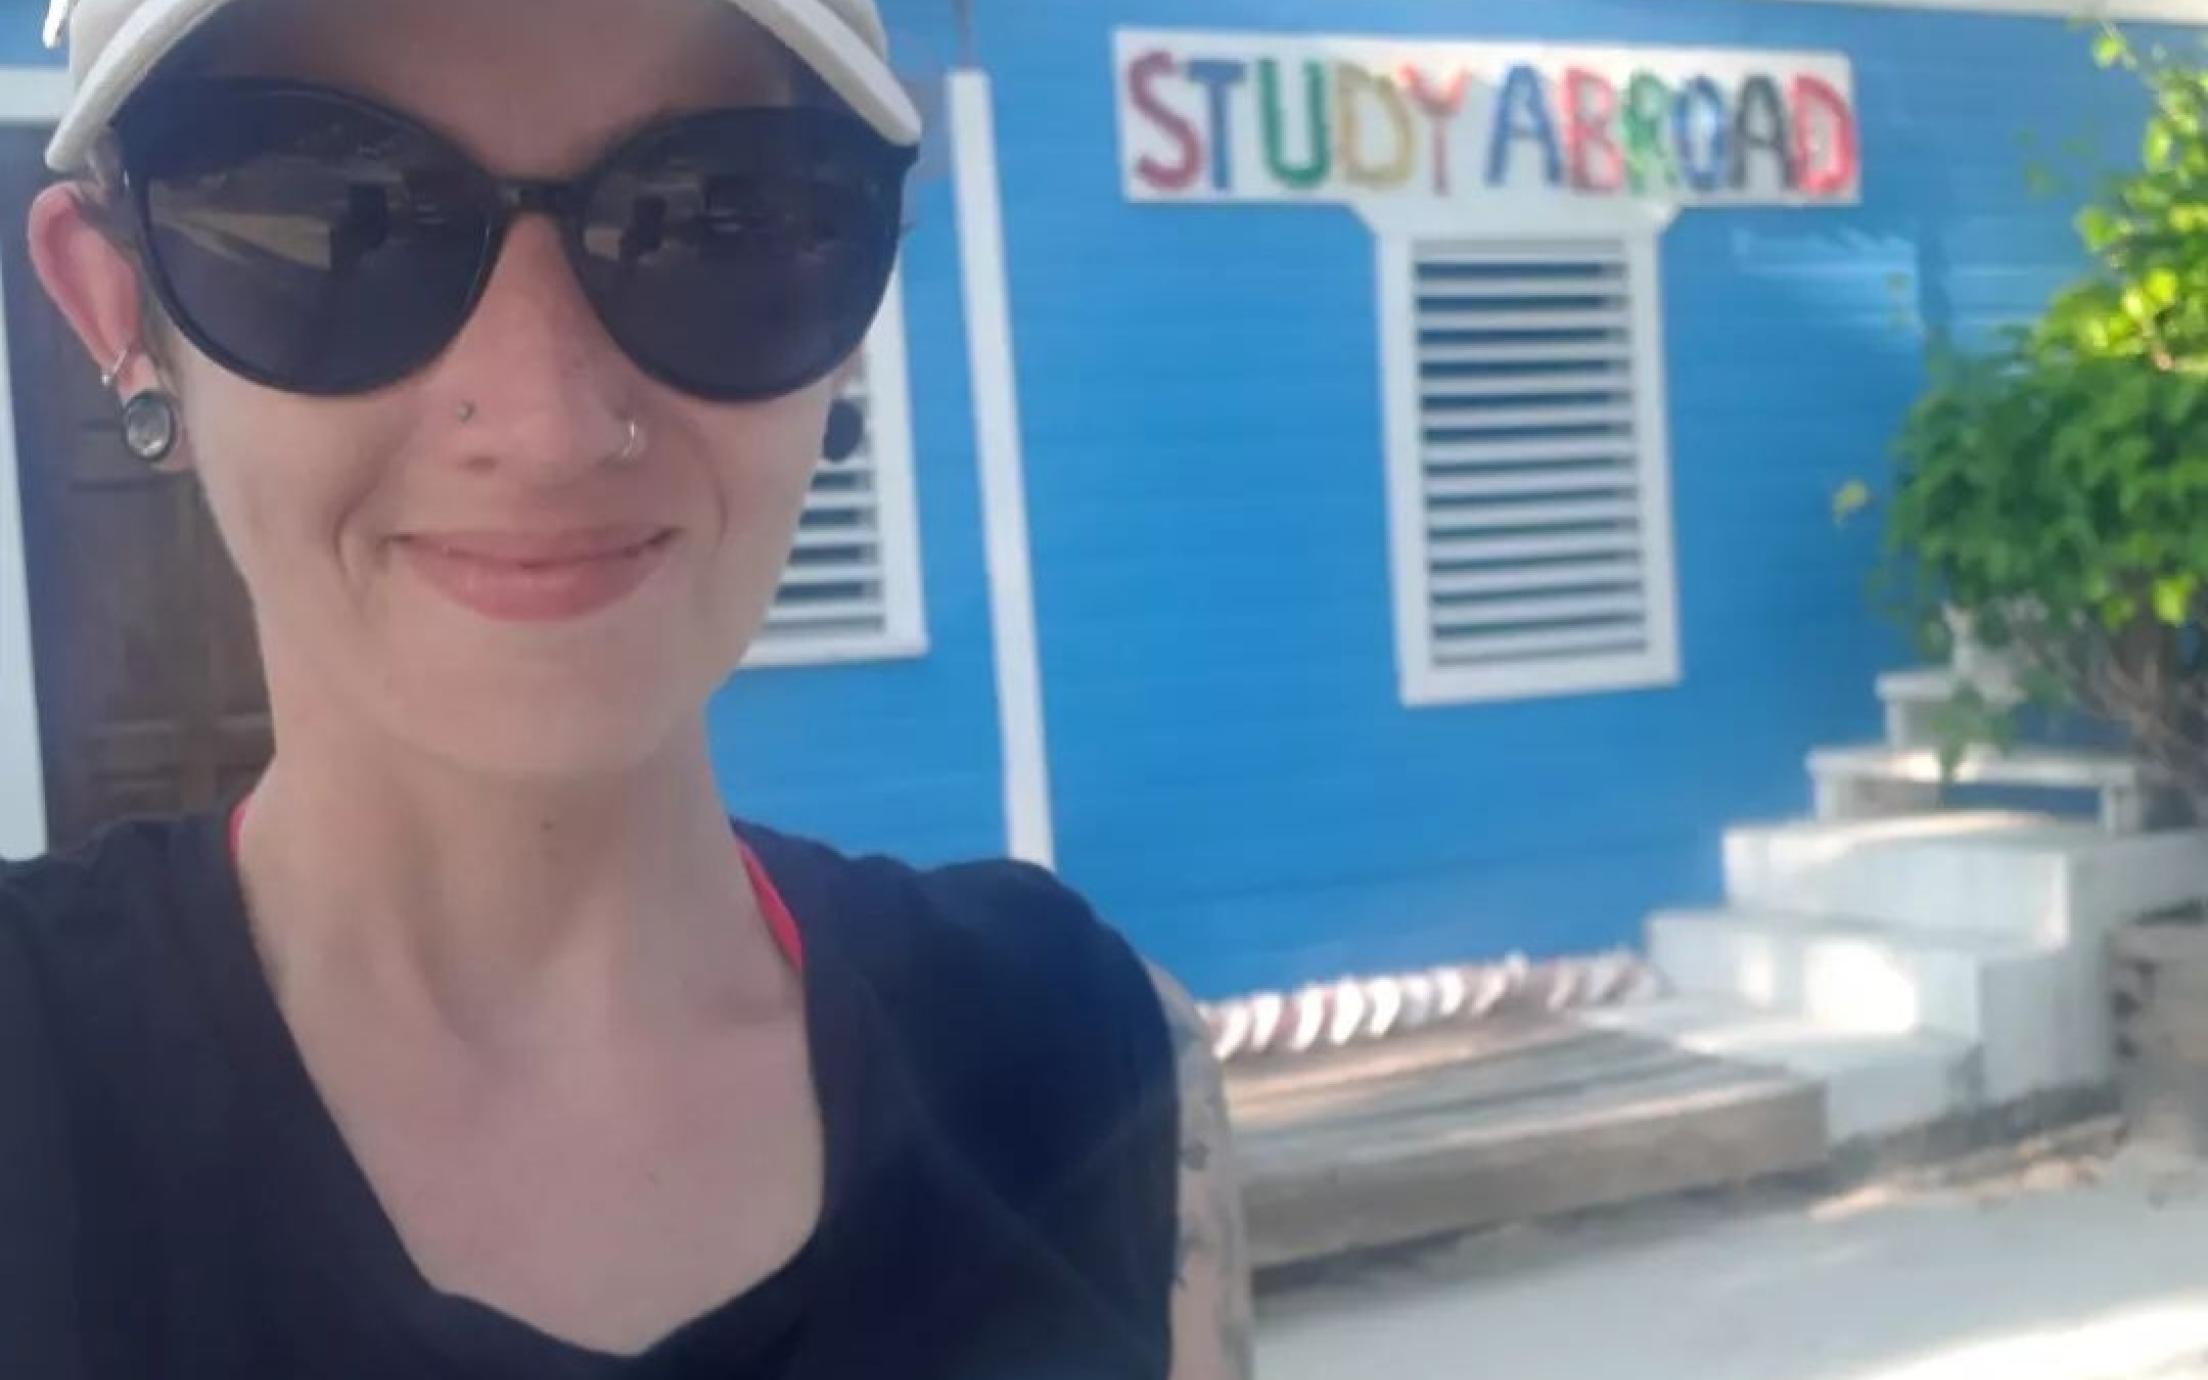 Melanie stands in front of the Tobacco Caye sign, which reads Study Abroad underneath it